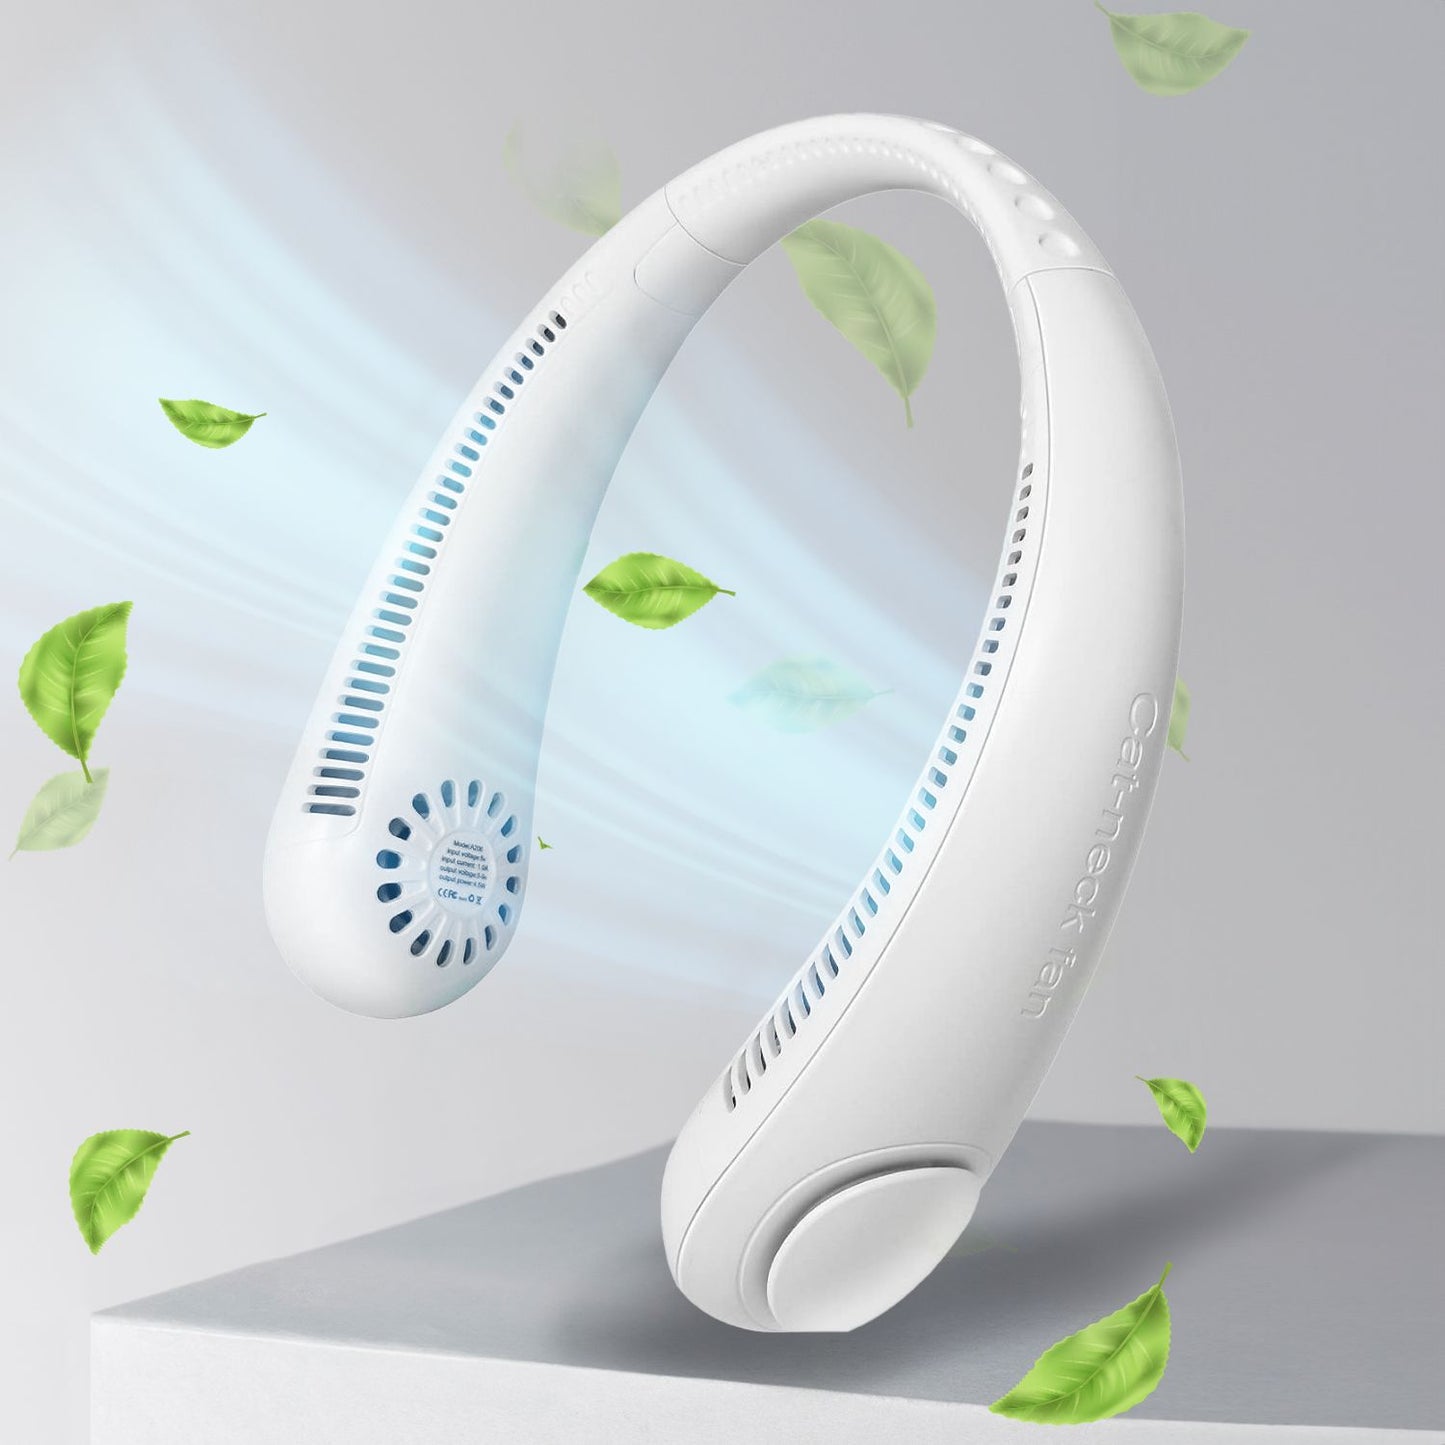 GOMINIMO Rechargeable Portable Bladeless Neck Fan with 3 Speeds and 62 Air Outlet (White) GO-NF-100-HJ